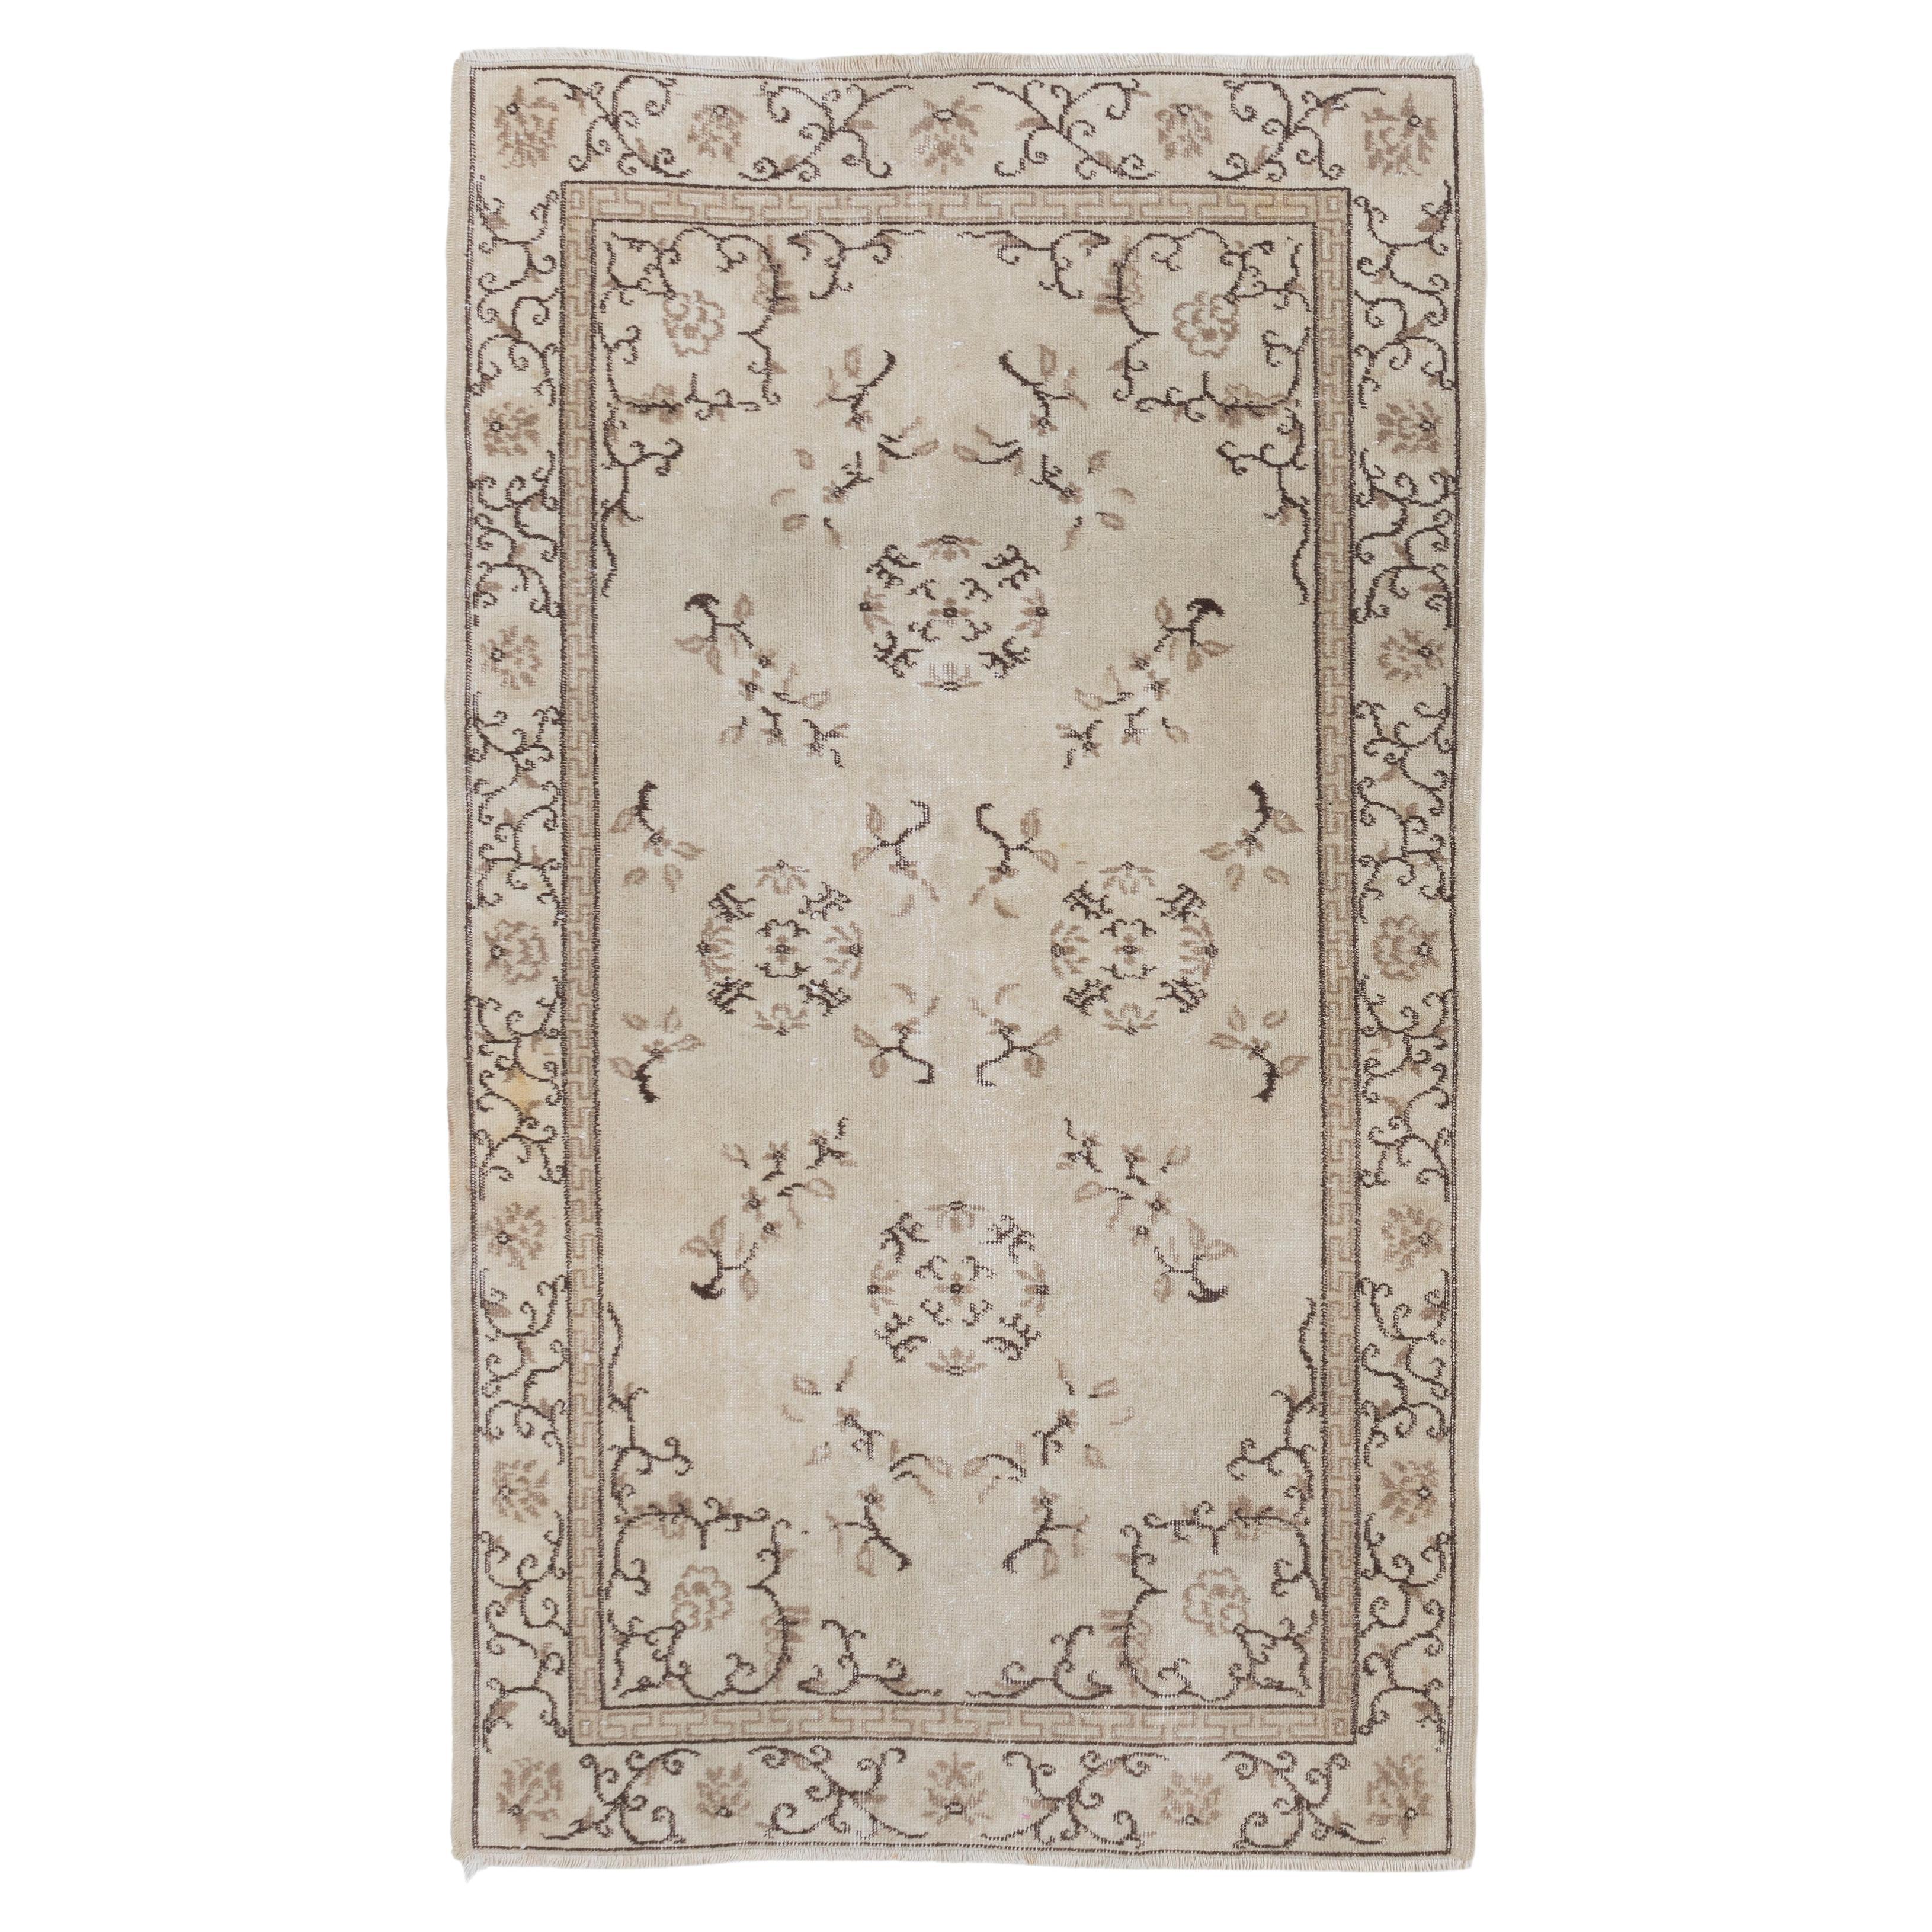 4x7 Ft Art Deco Chinese Design Wool Rug in Beige, Brown Taupe Colors, circa 1960 For Sale